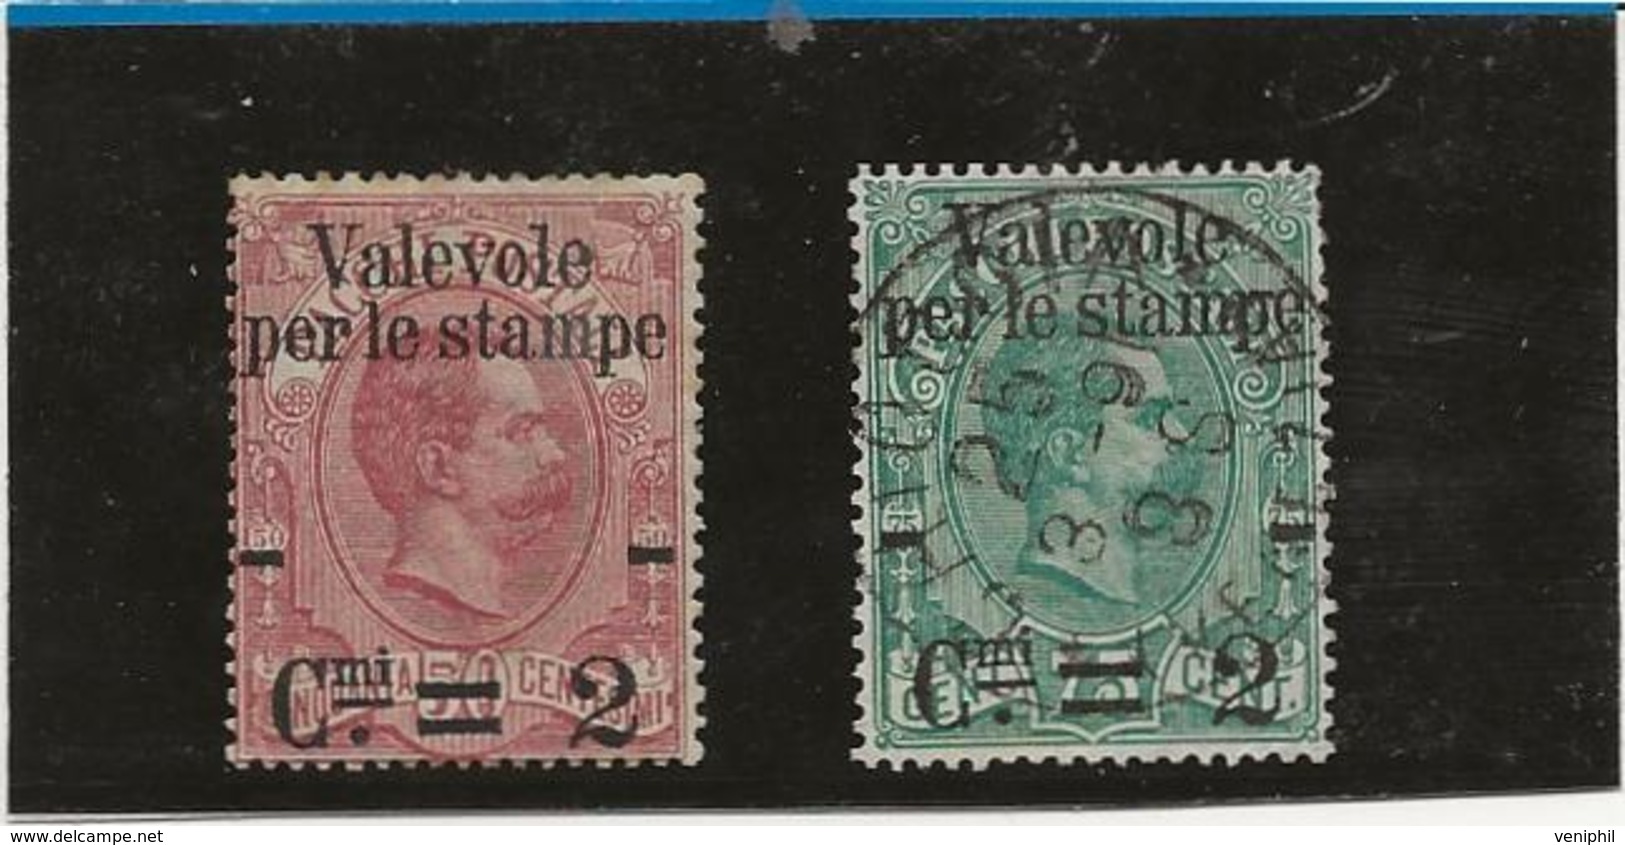 TIMBRES N° 48 NEUF S GOMME + N° 49 OBLITERE - ANNEE 1890 - COTE : 40 € - Afgestempeld